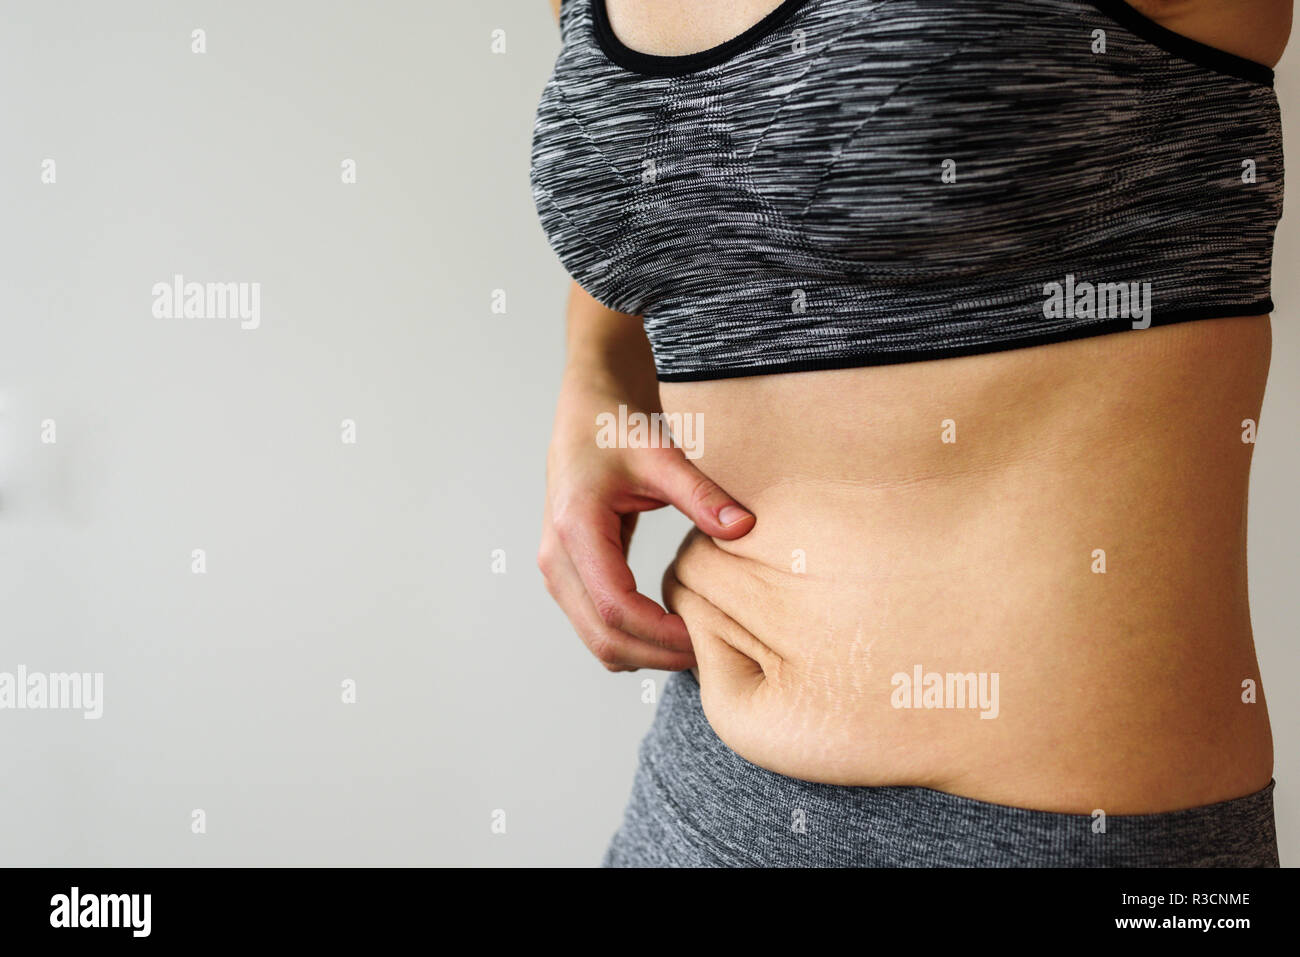 Woman belly after dieting. Skinny fat concept. Stretch marks Stock Photo